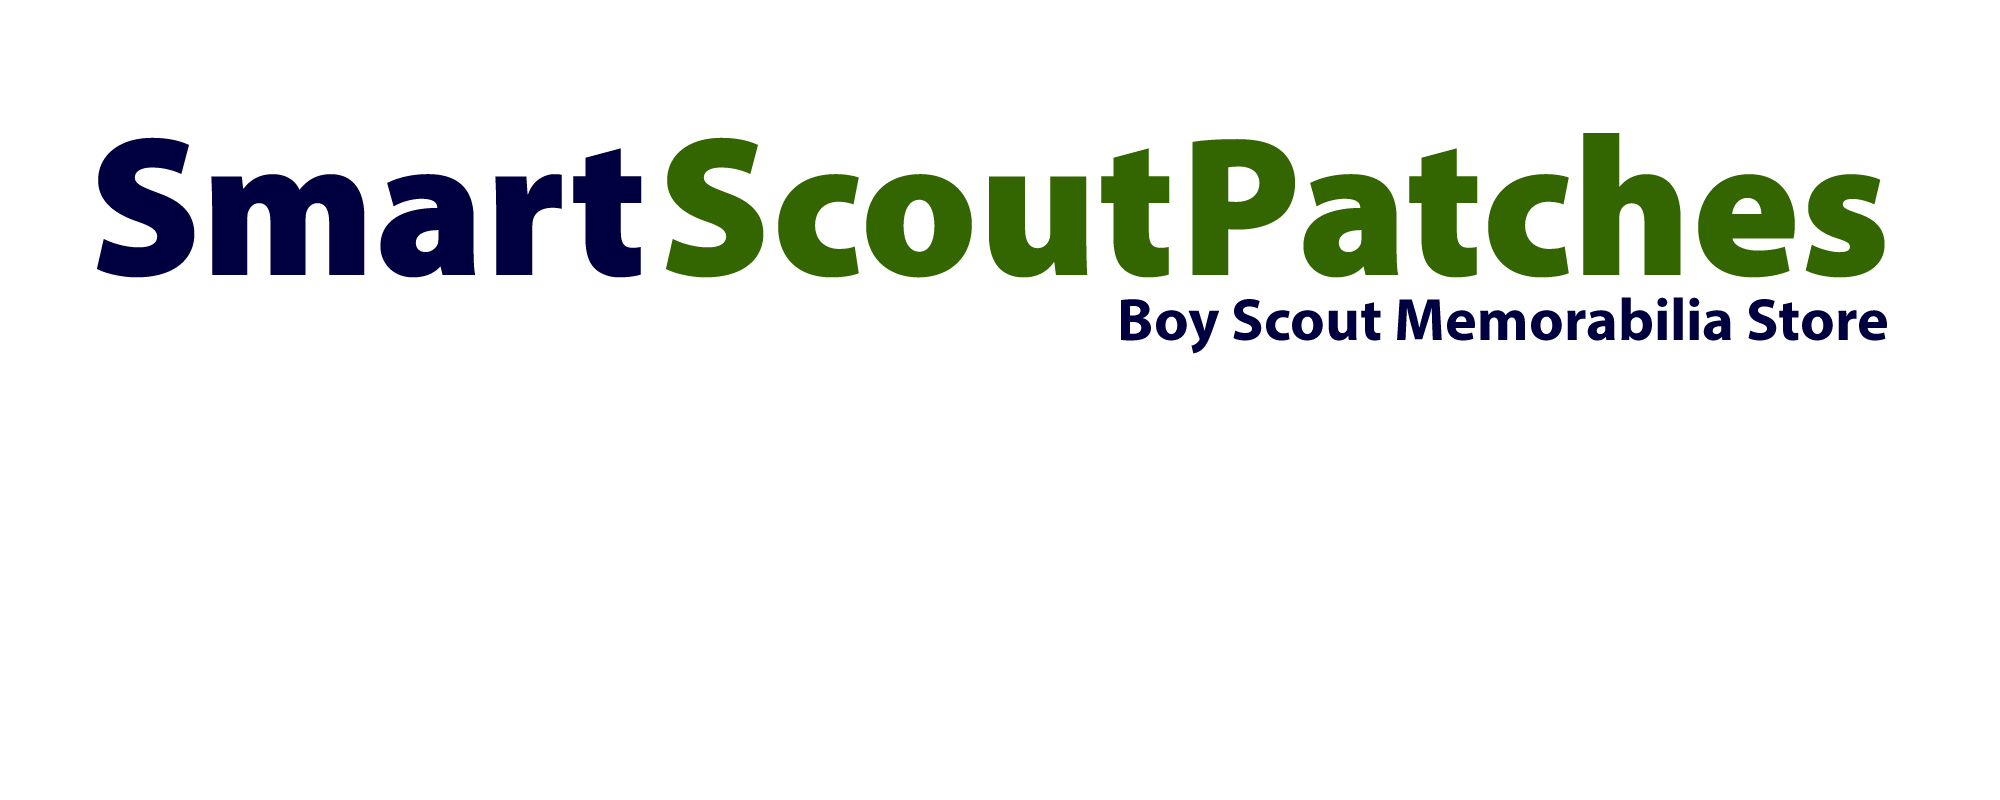 smart-scout-patches logo